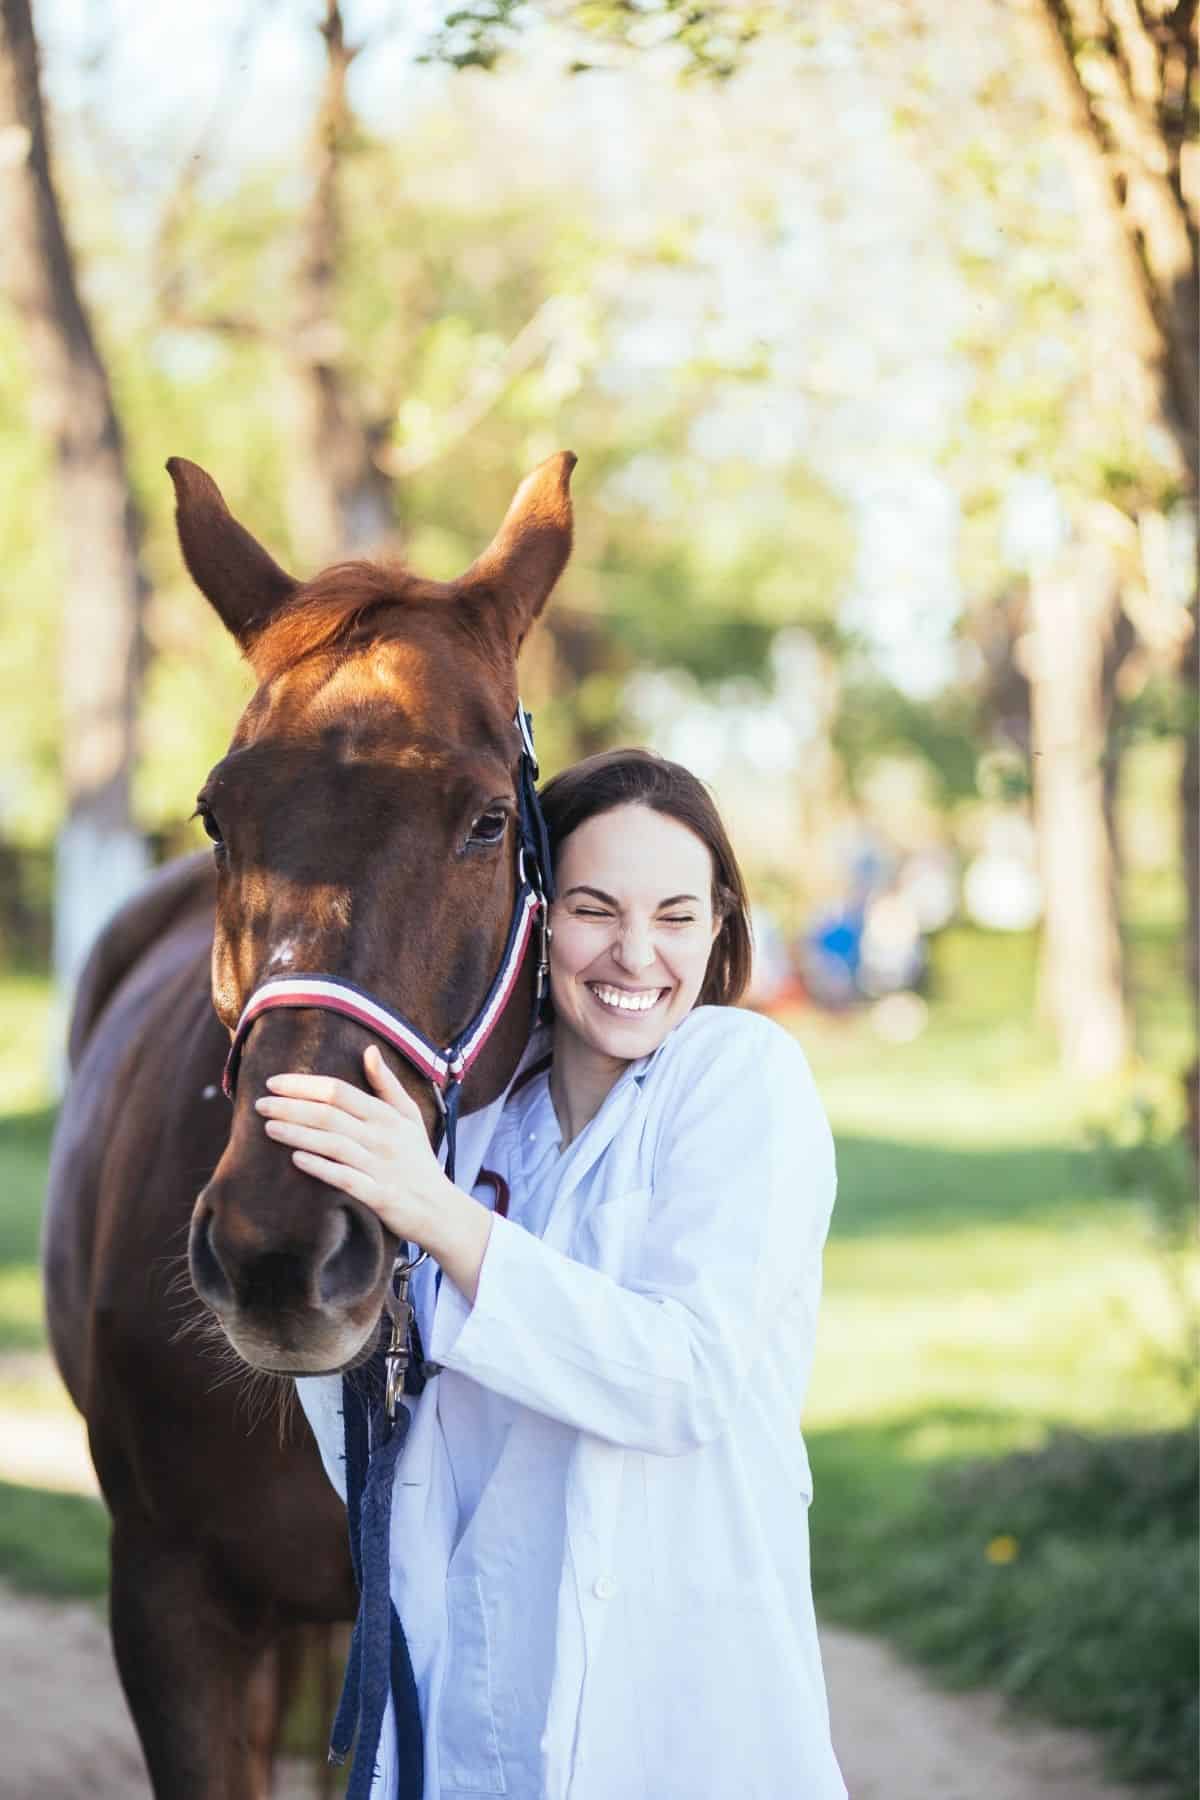 Woman smiling next to brown horse